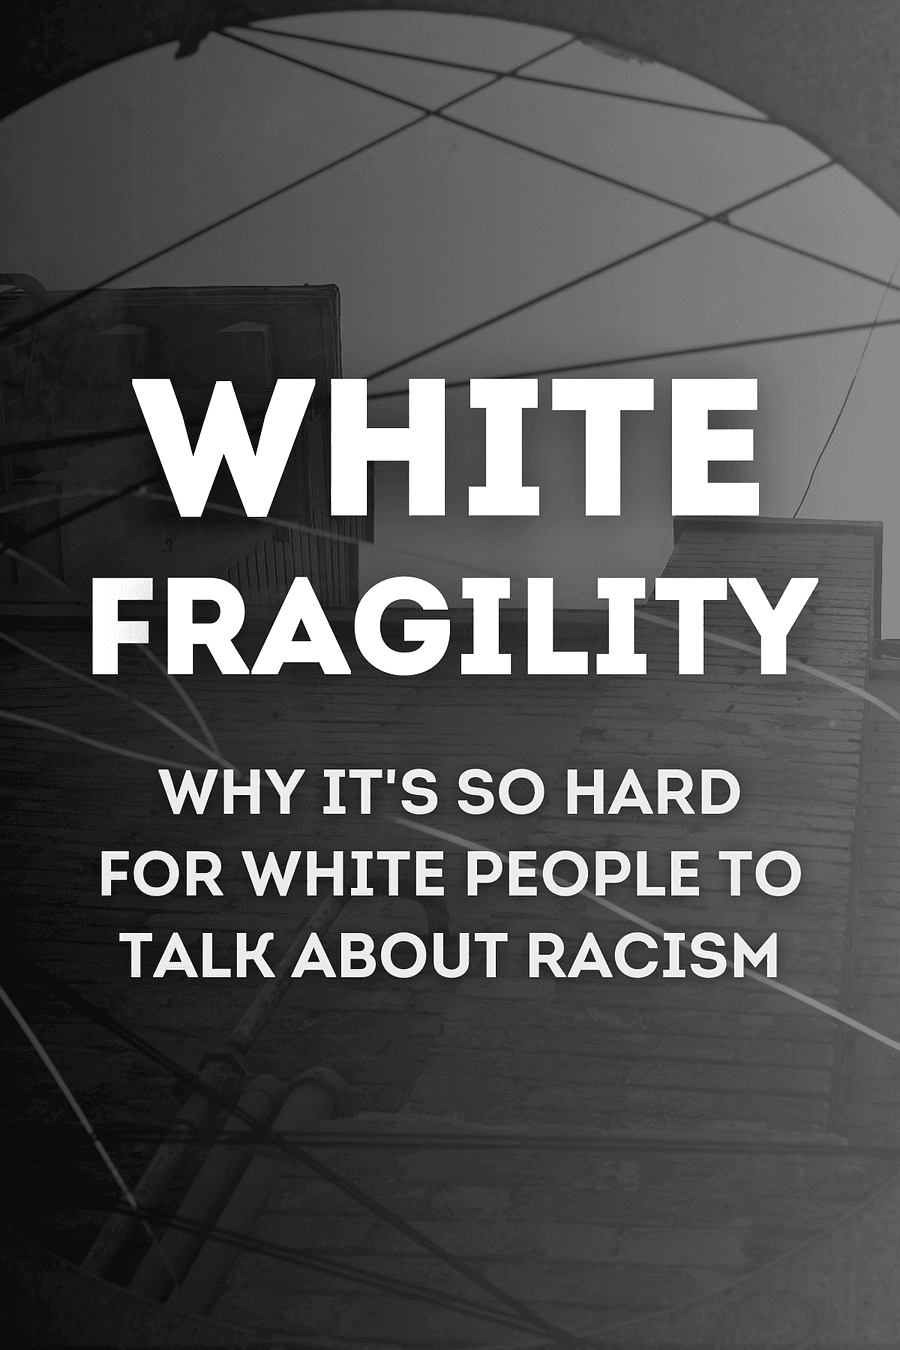 White Fragility by Robin J. DiAngelo - Book Summary